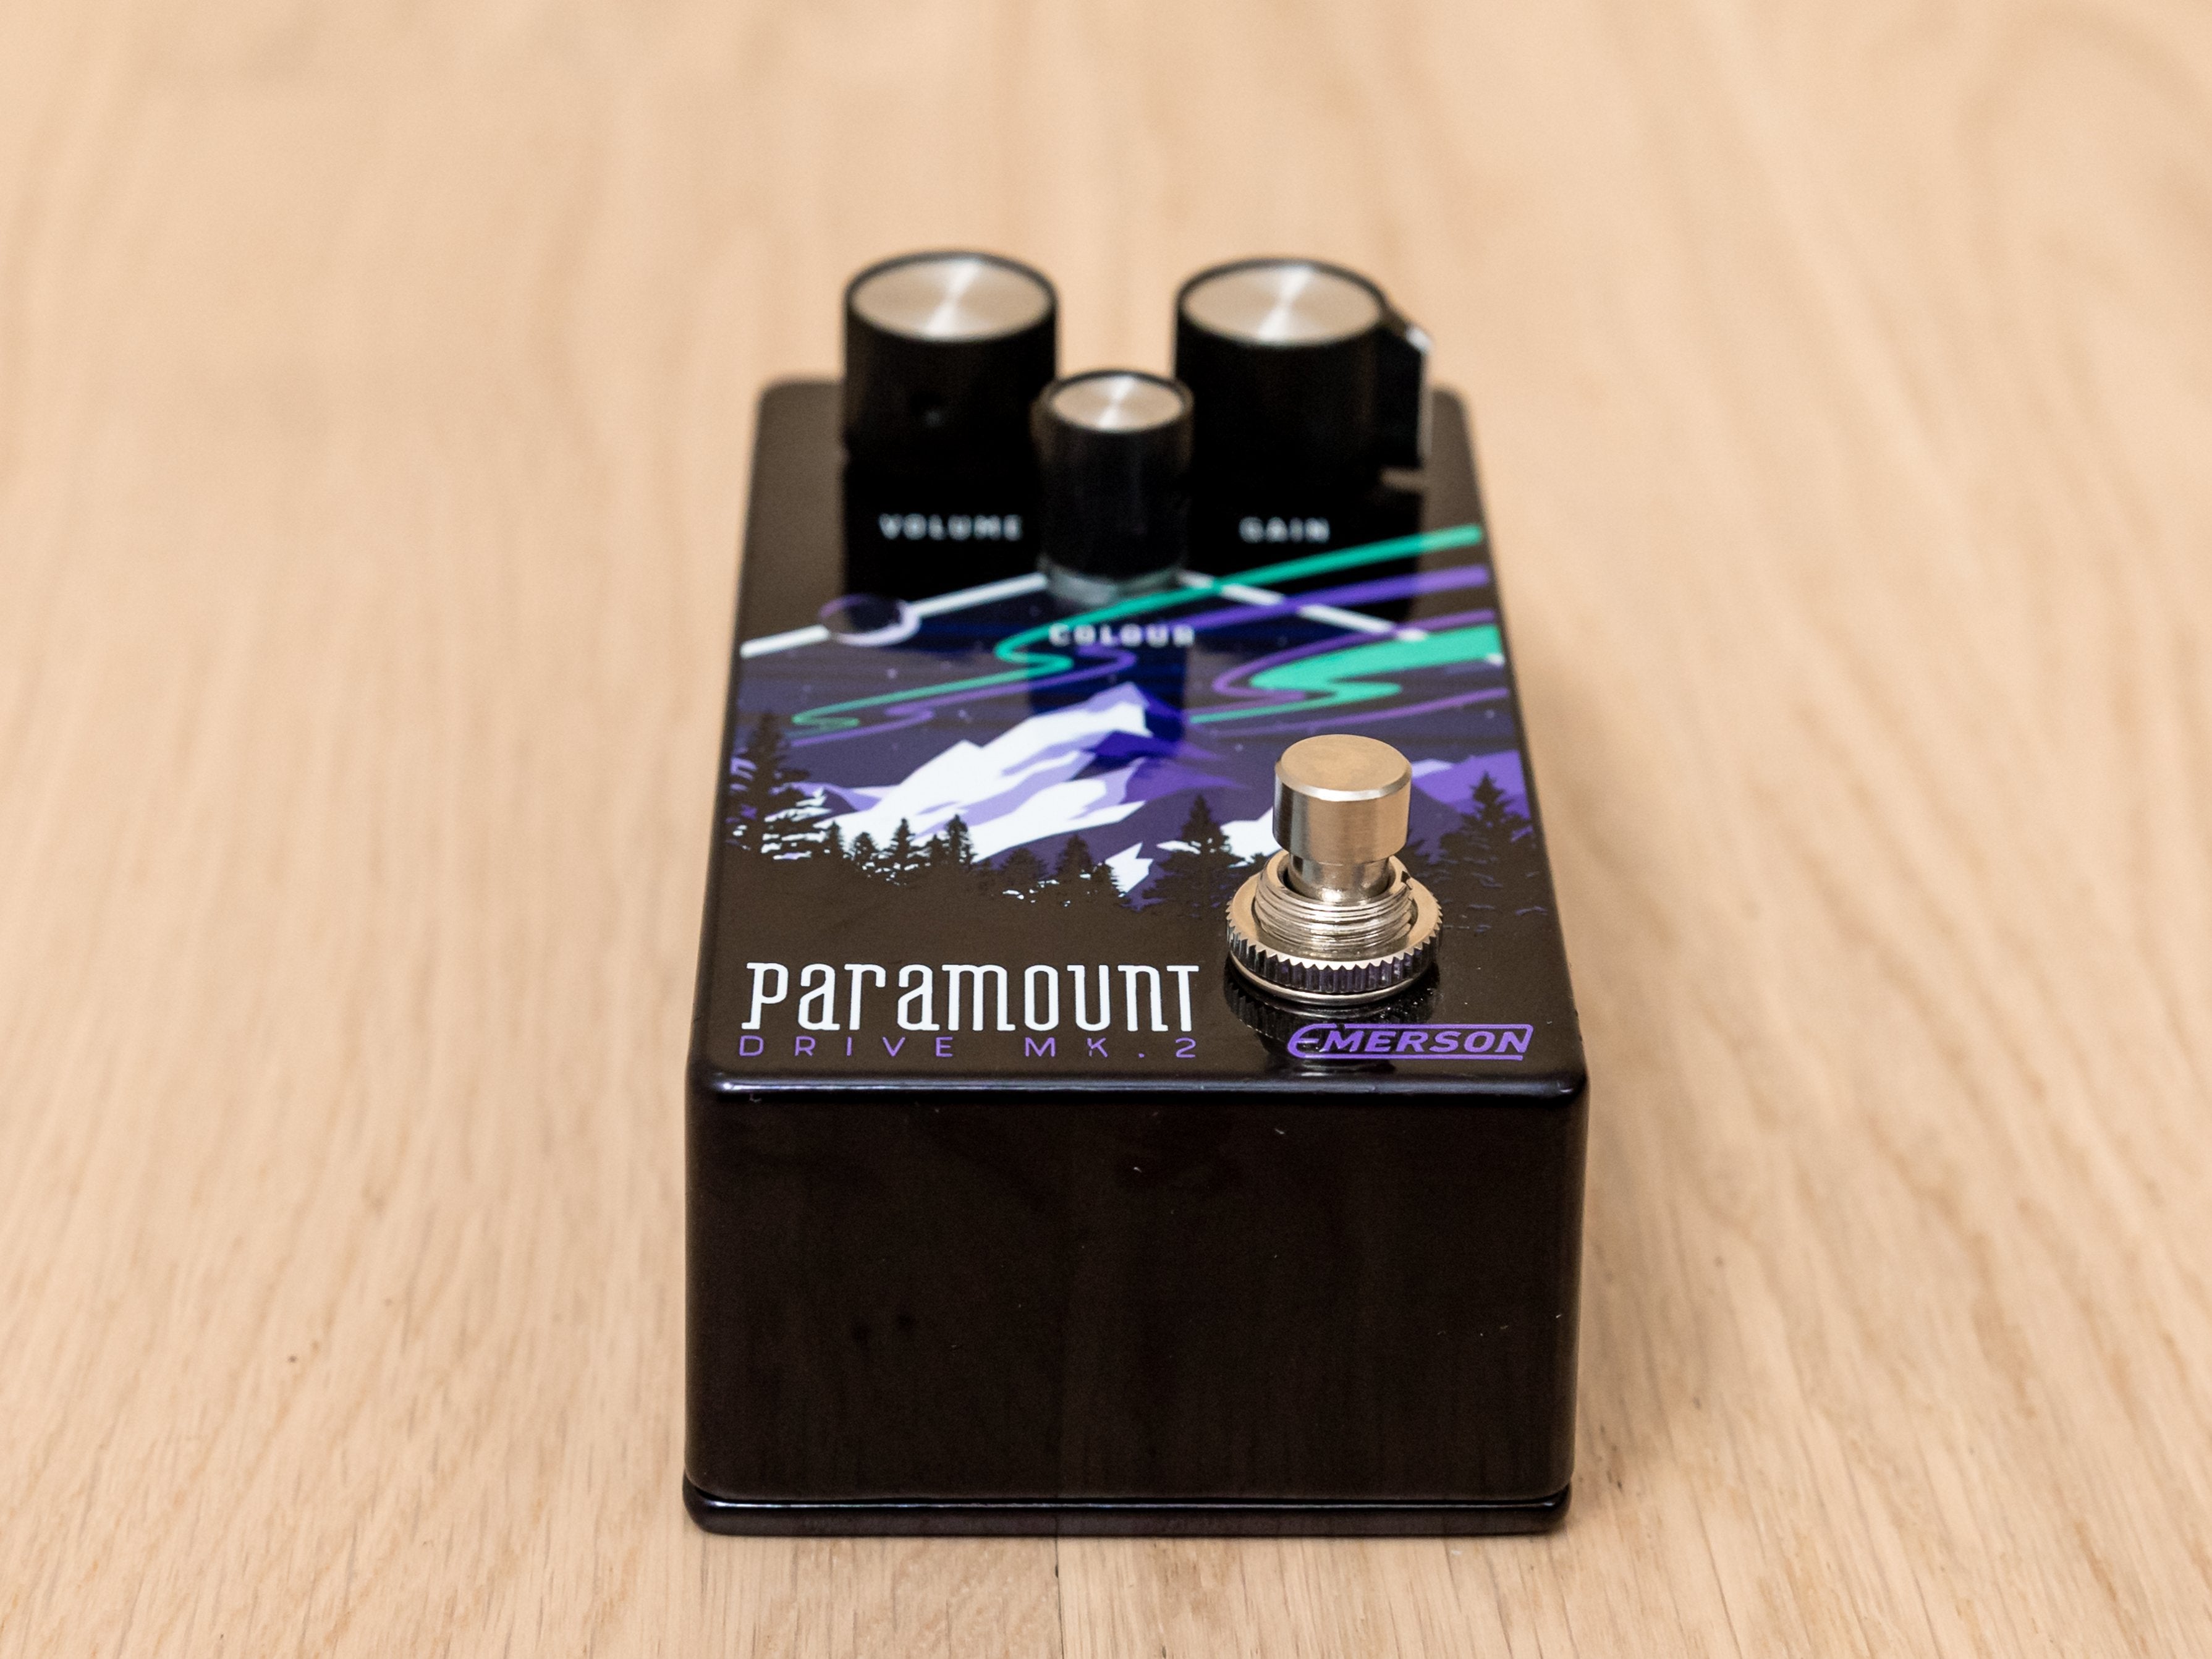 Emerson Paramount Drive Mk II Overdrive Guitar Effects Pedal